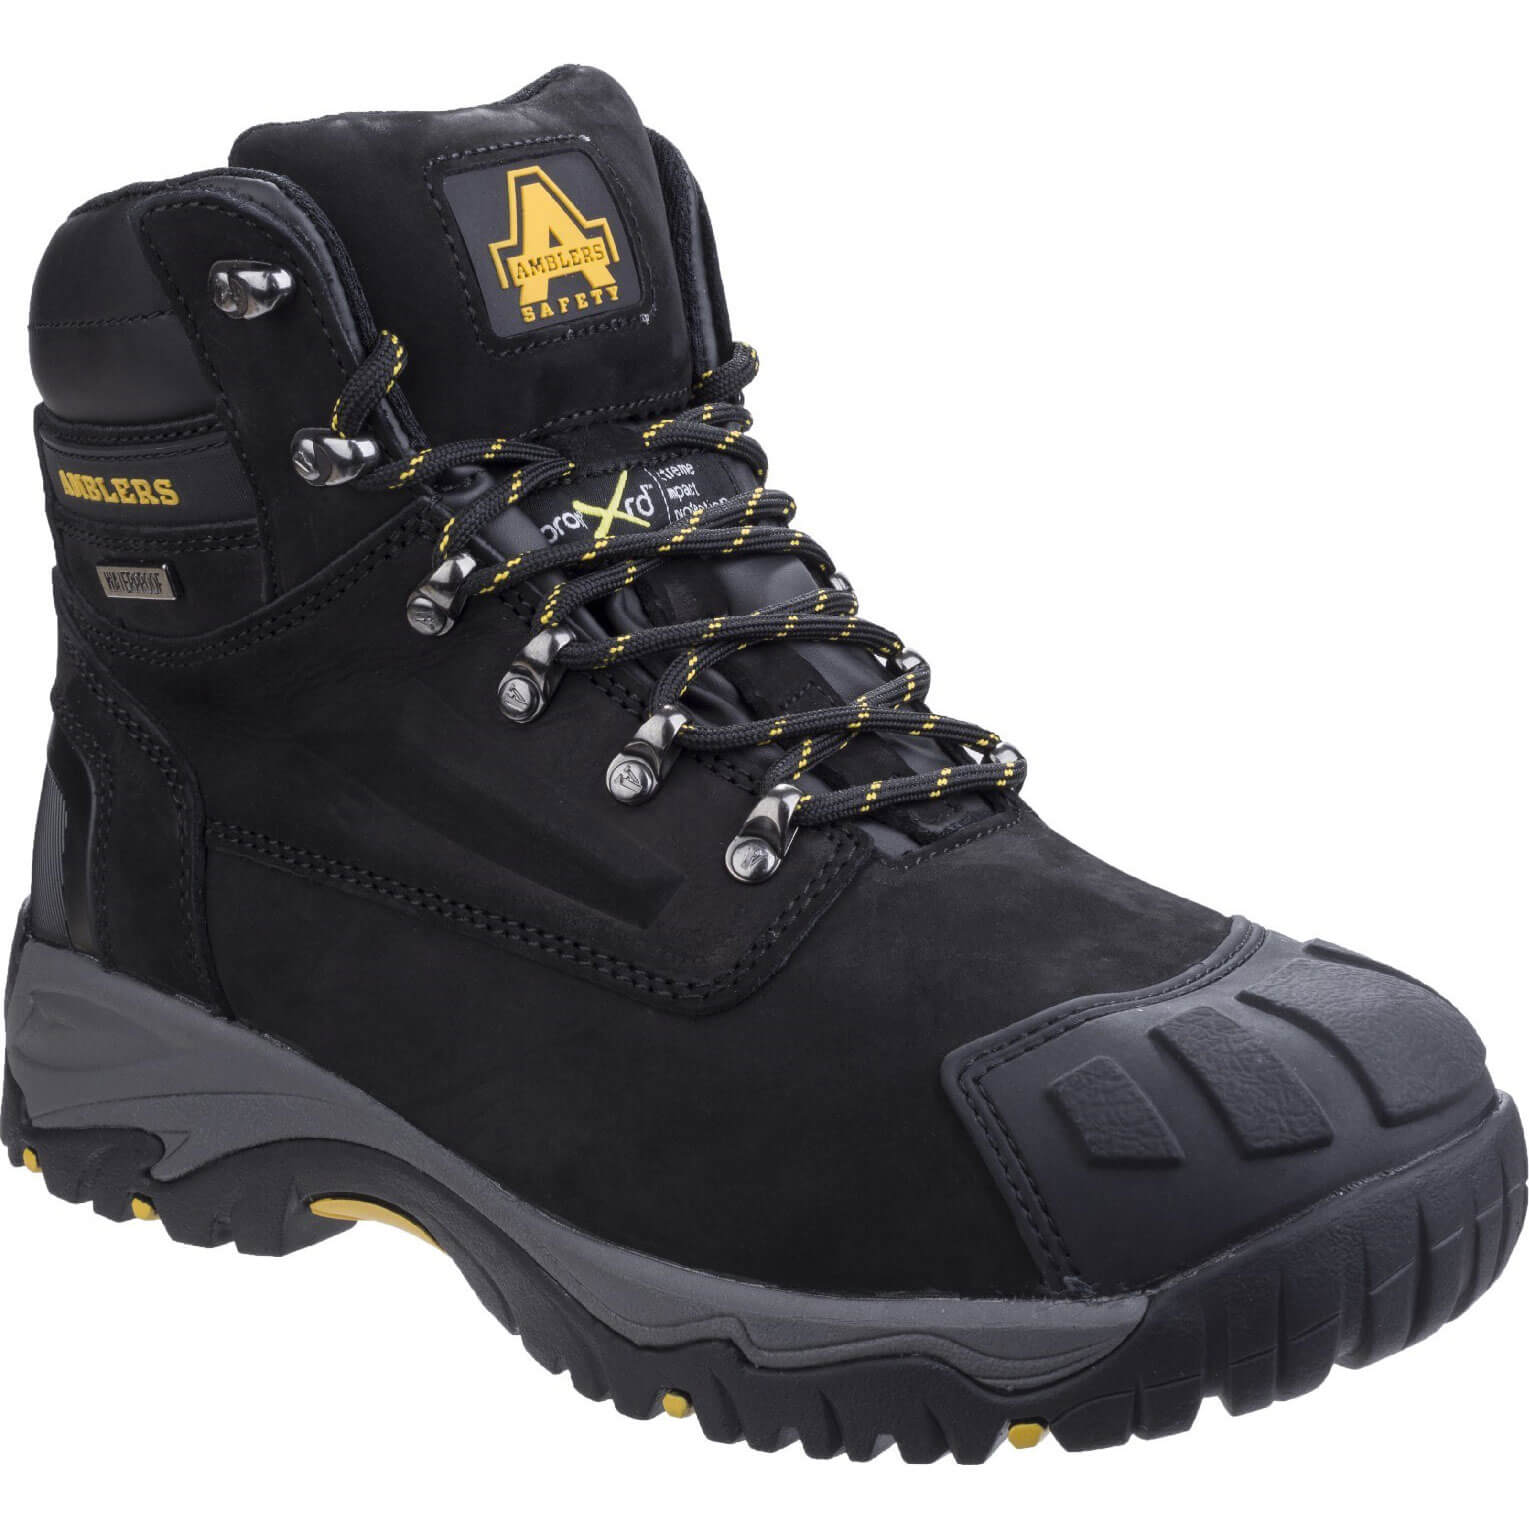 Photo of Amblers Mens Safety Fs987 Metatarsal Protection Waterproof Safety Boots Black Size 7